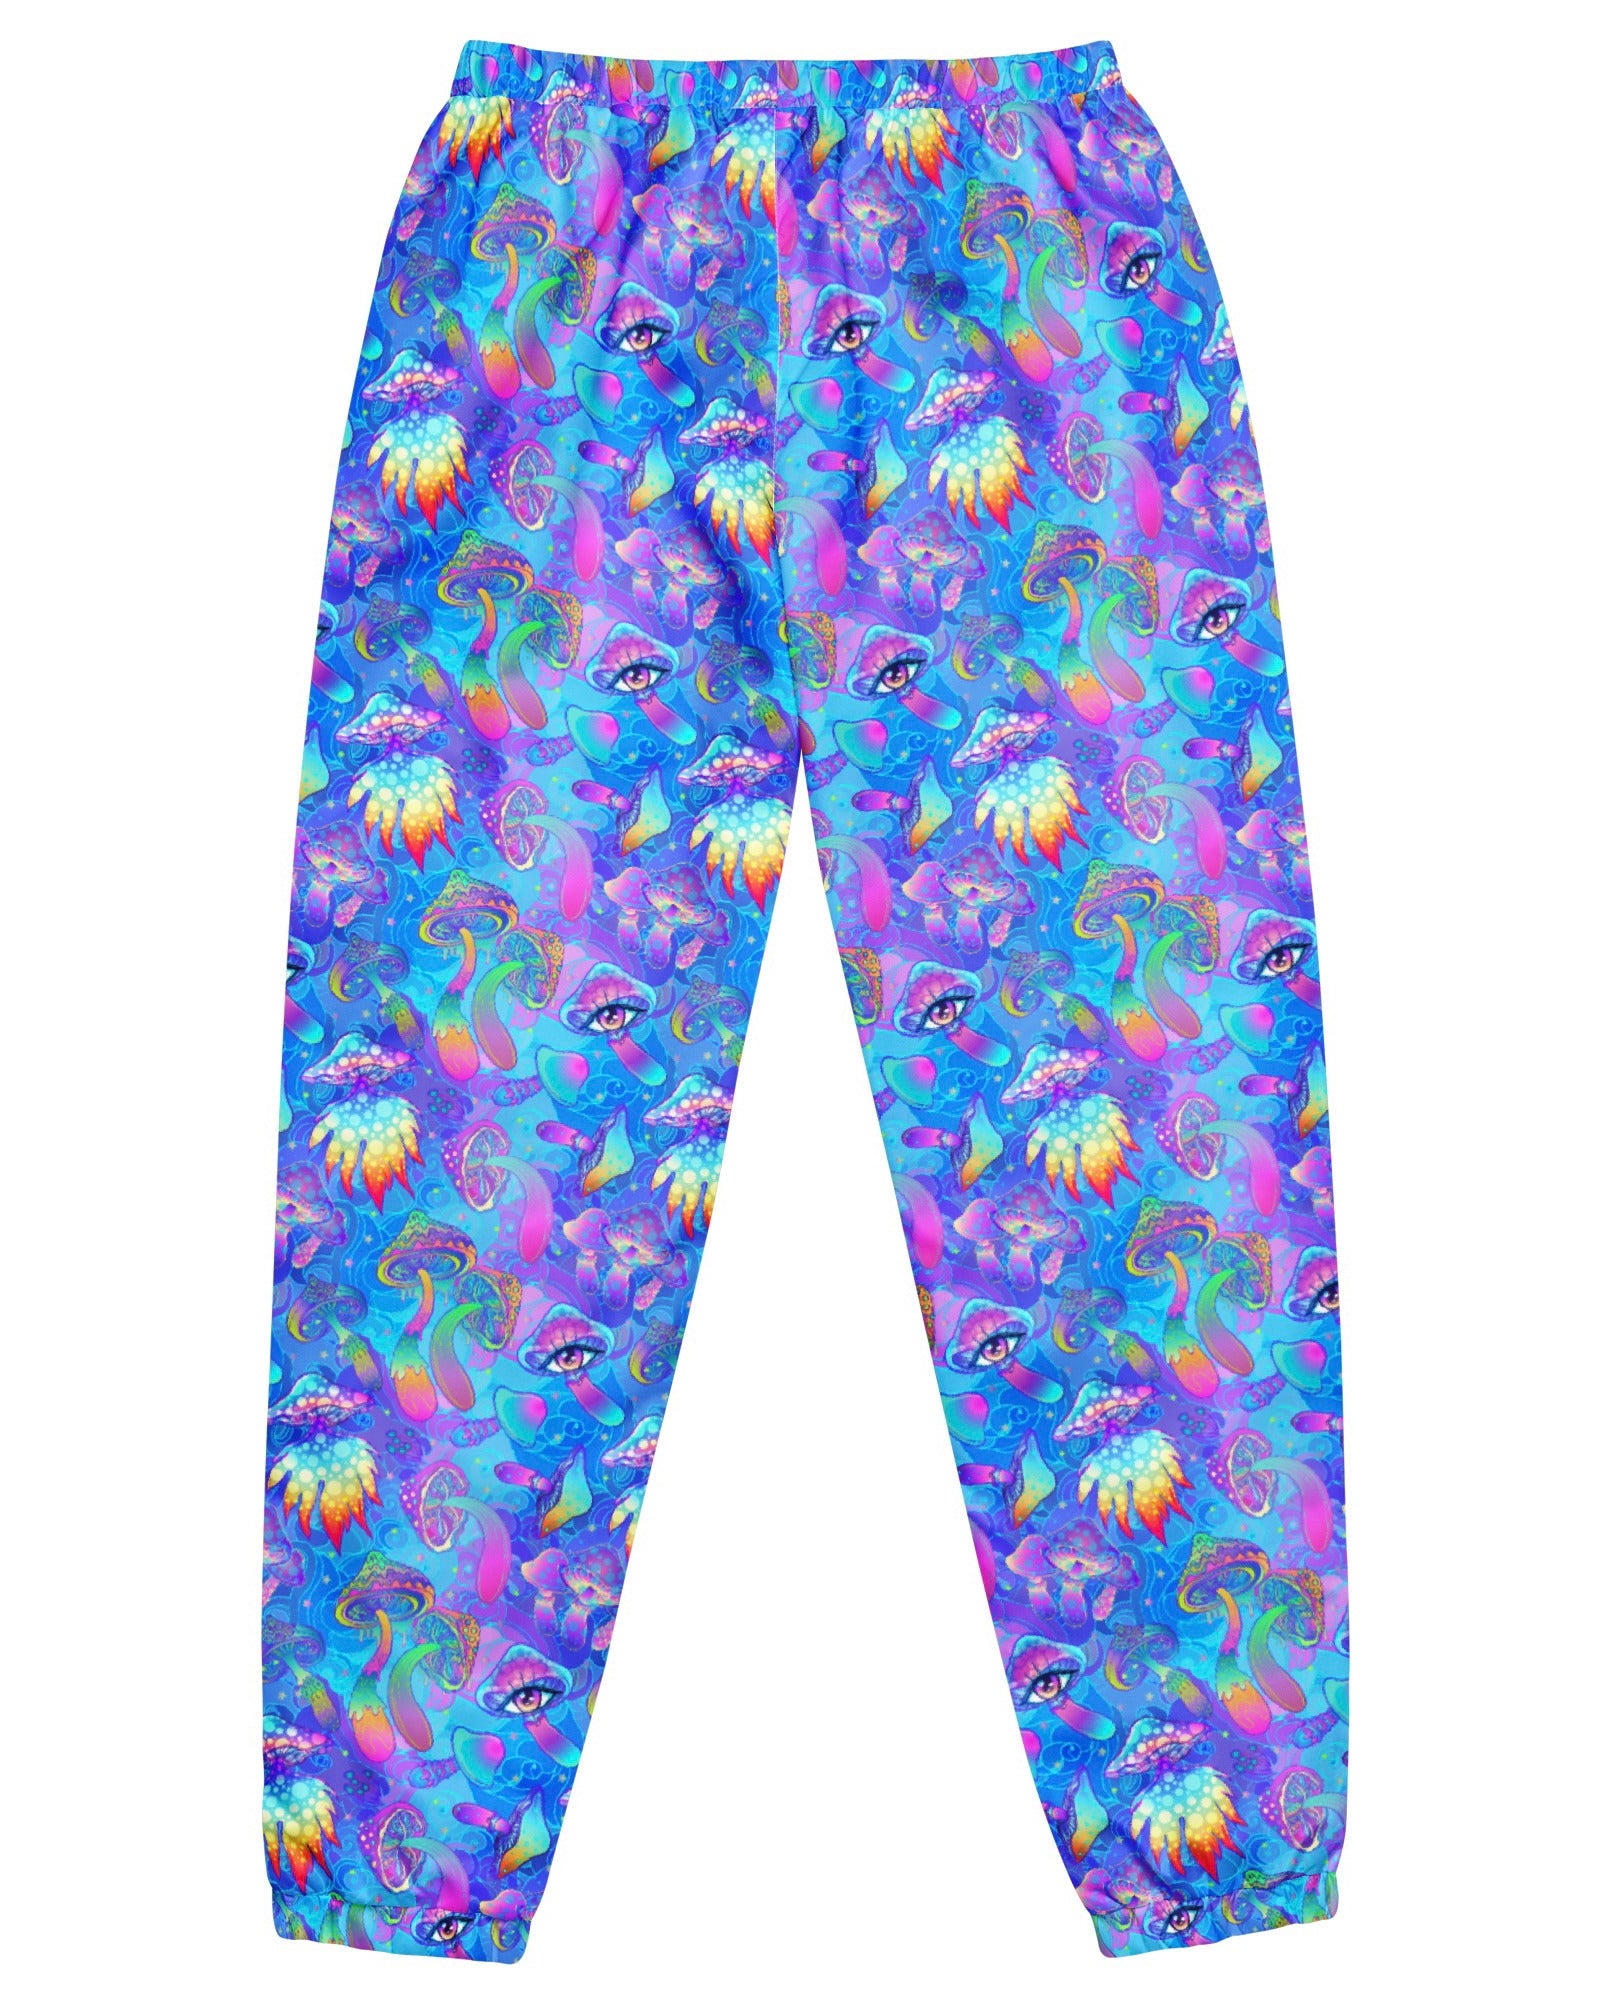 Shroomin Blue Track Pants, Track Pants, - One Stop Rave